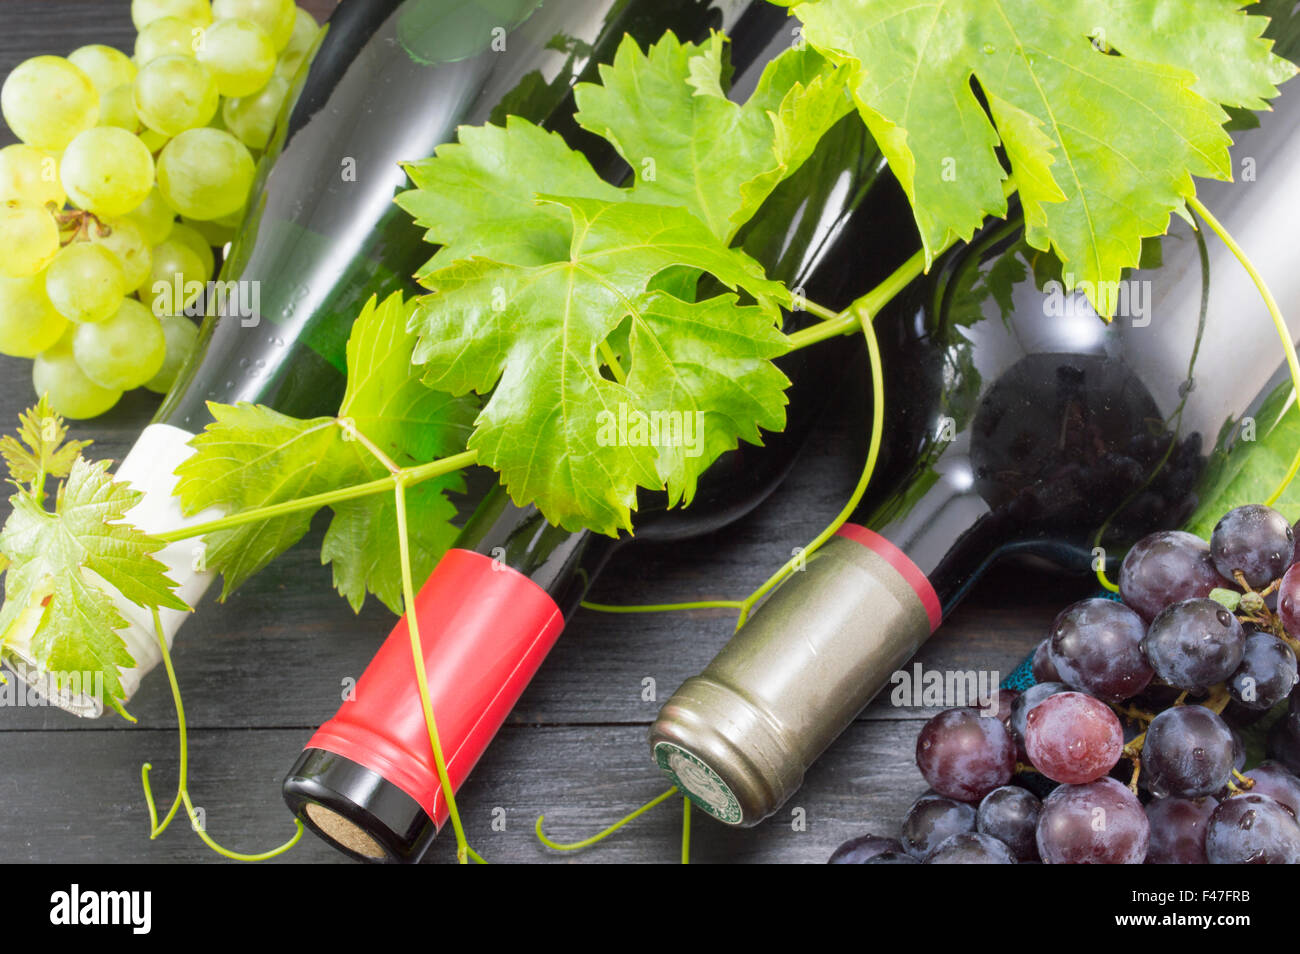 Three bottles of wine and grapes on dark wooden table Stock Photo